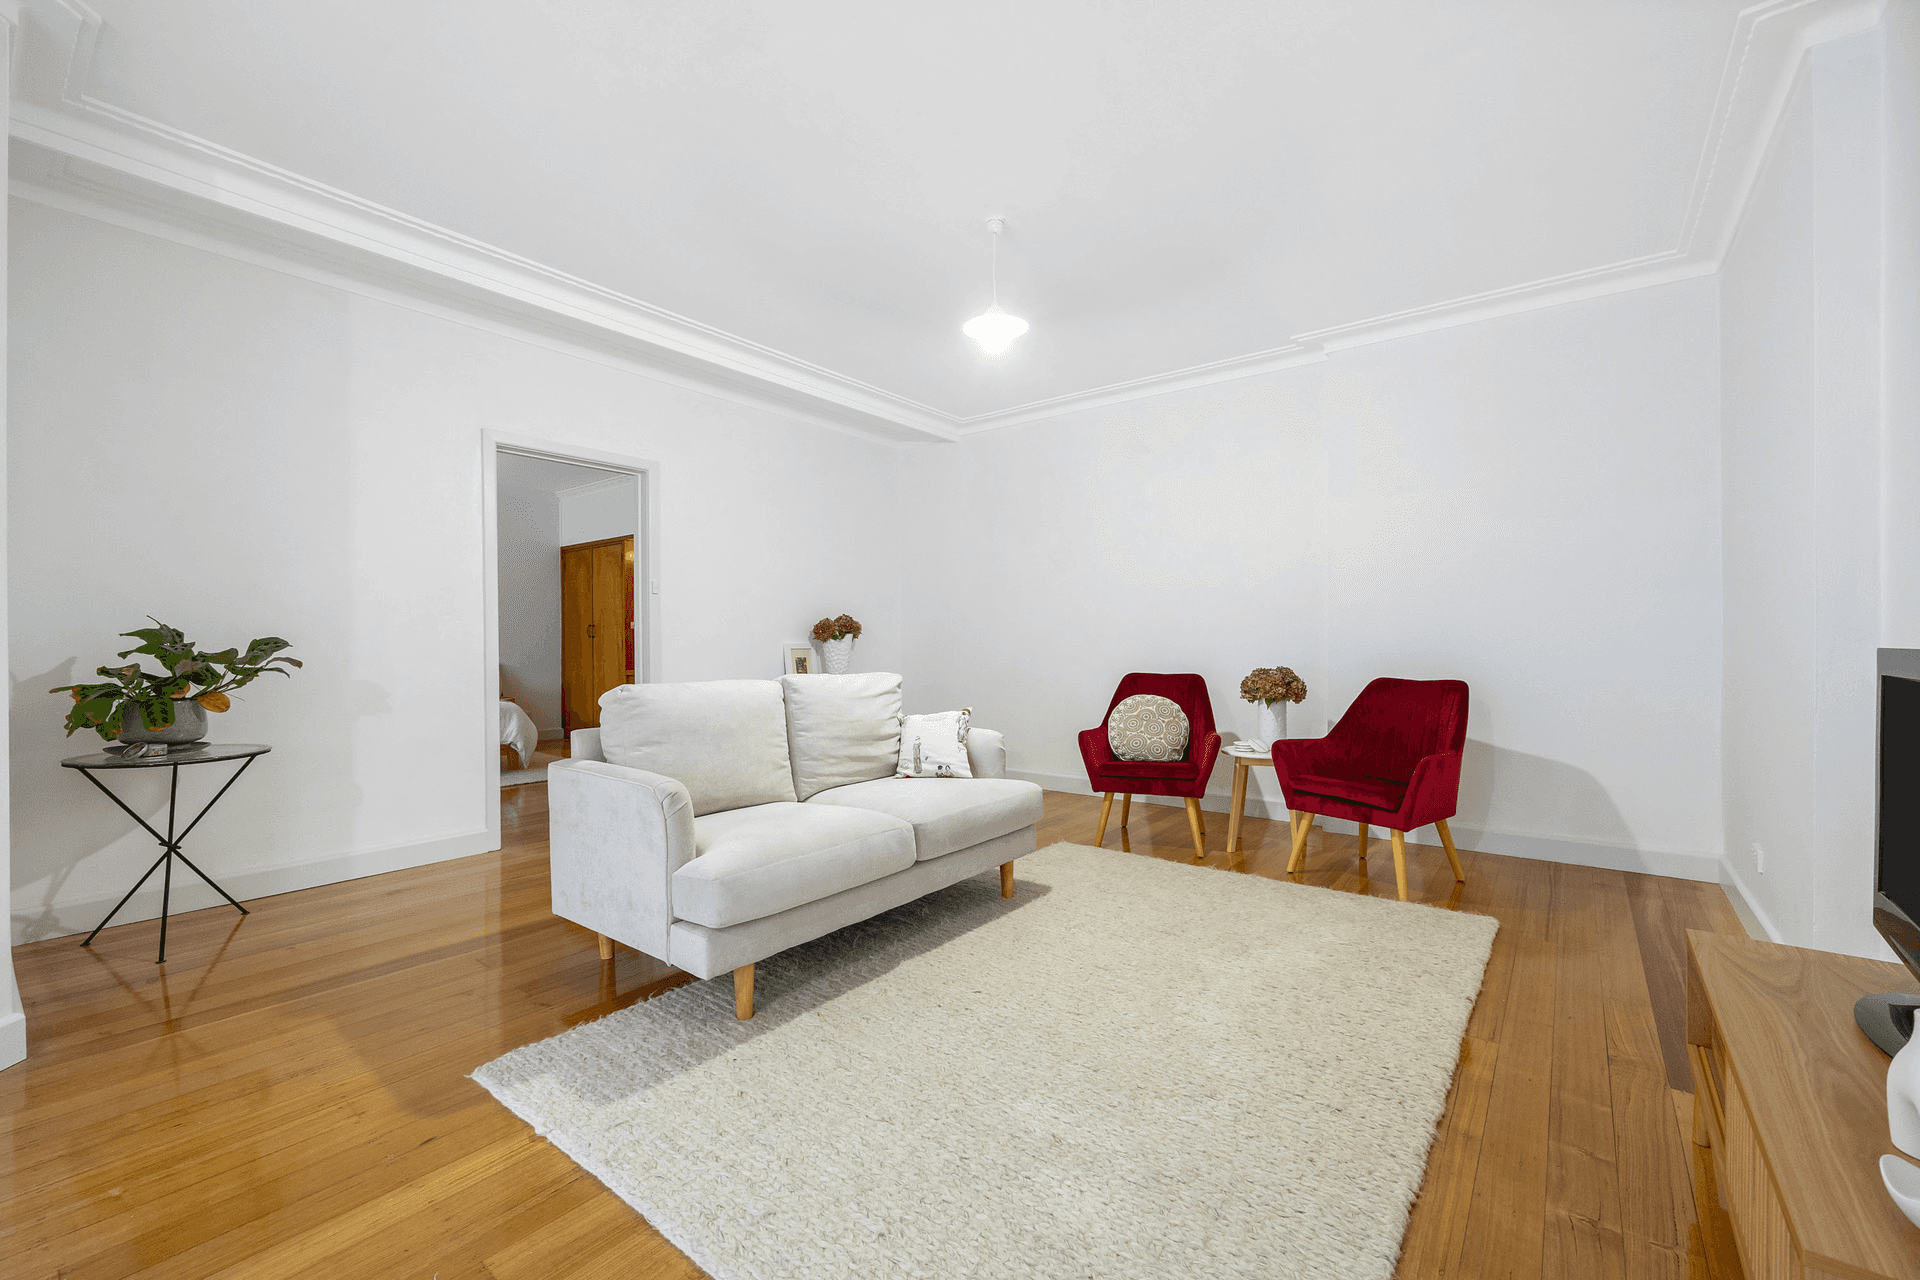 2/304 Clarendon Street, Soldiers Hill, VIC 3350